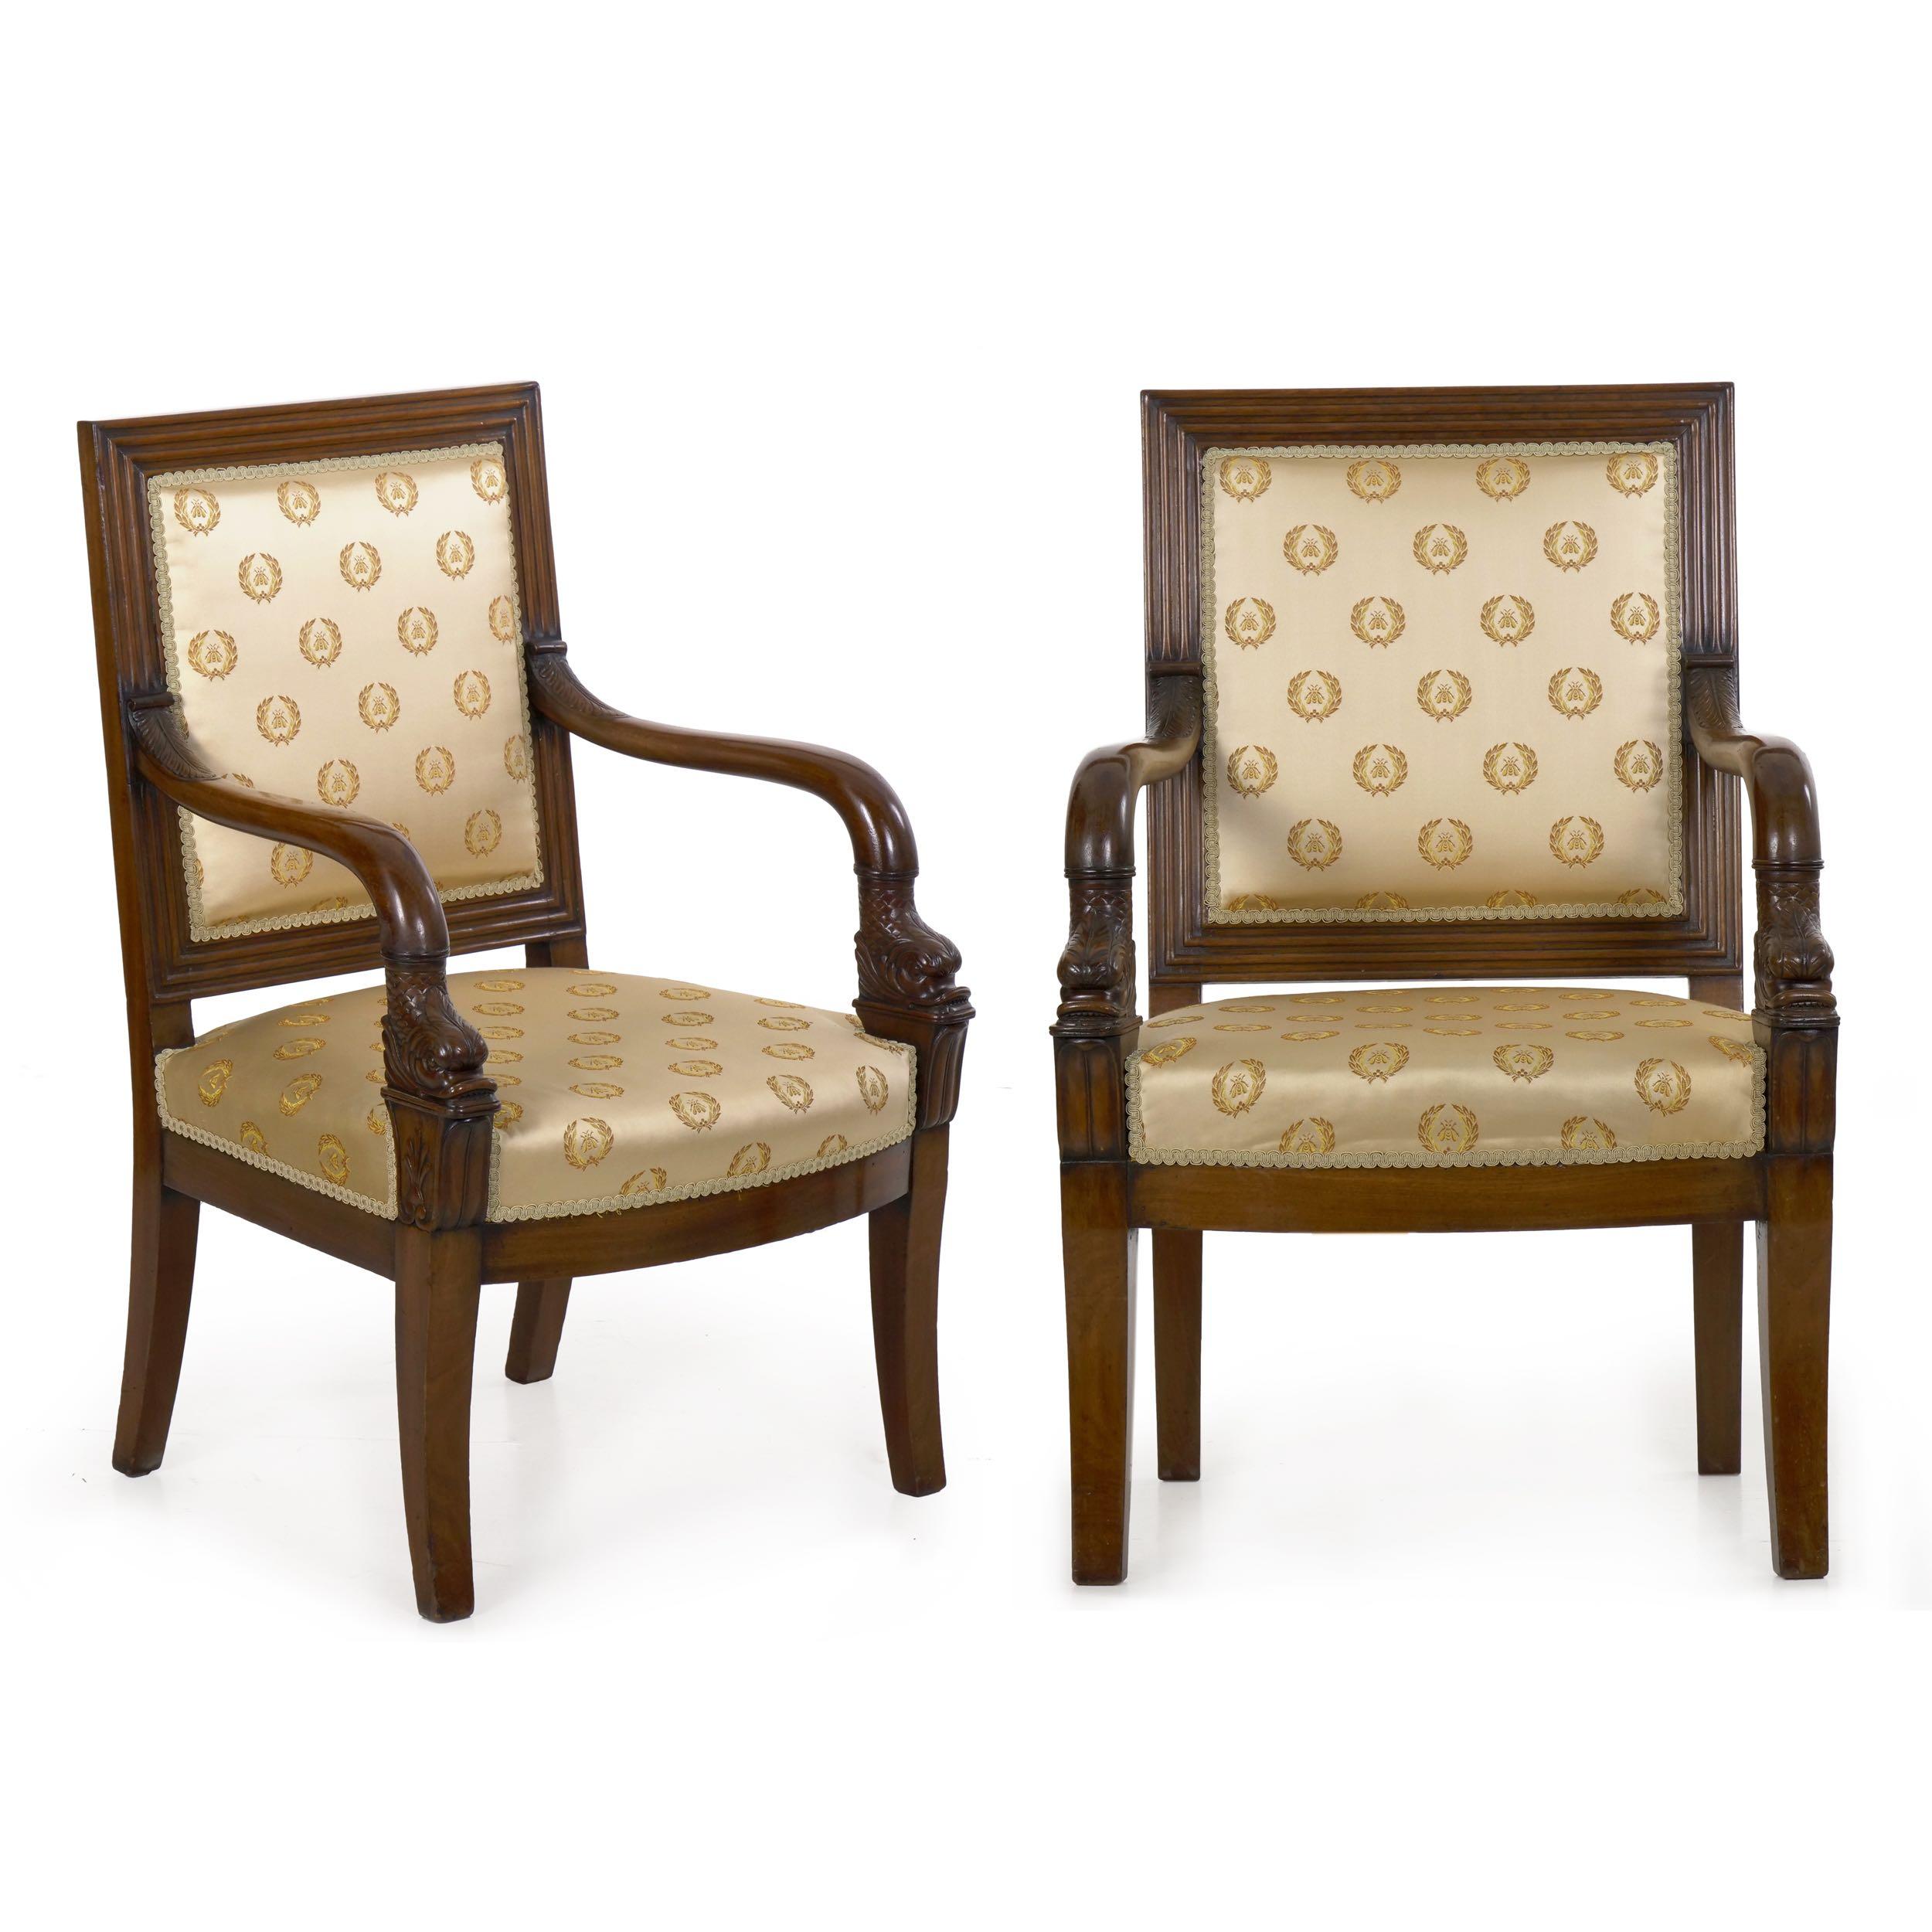 This very fine pair of armchairs is crafted from dense solid mahogany woods throughout, this nicely molded around the back with generous reeding that frames the stuffed and upholstered back. This is covered in an appropriate Napoleonic style fabric